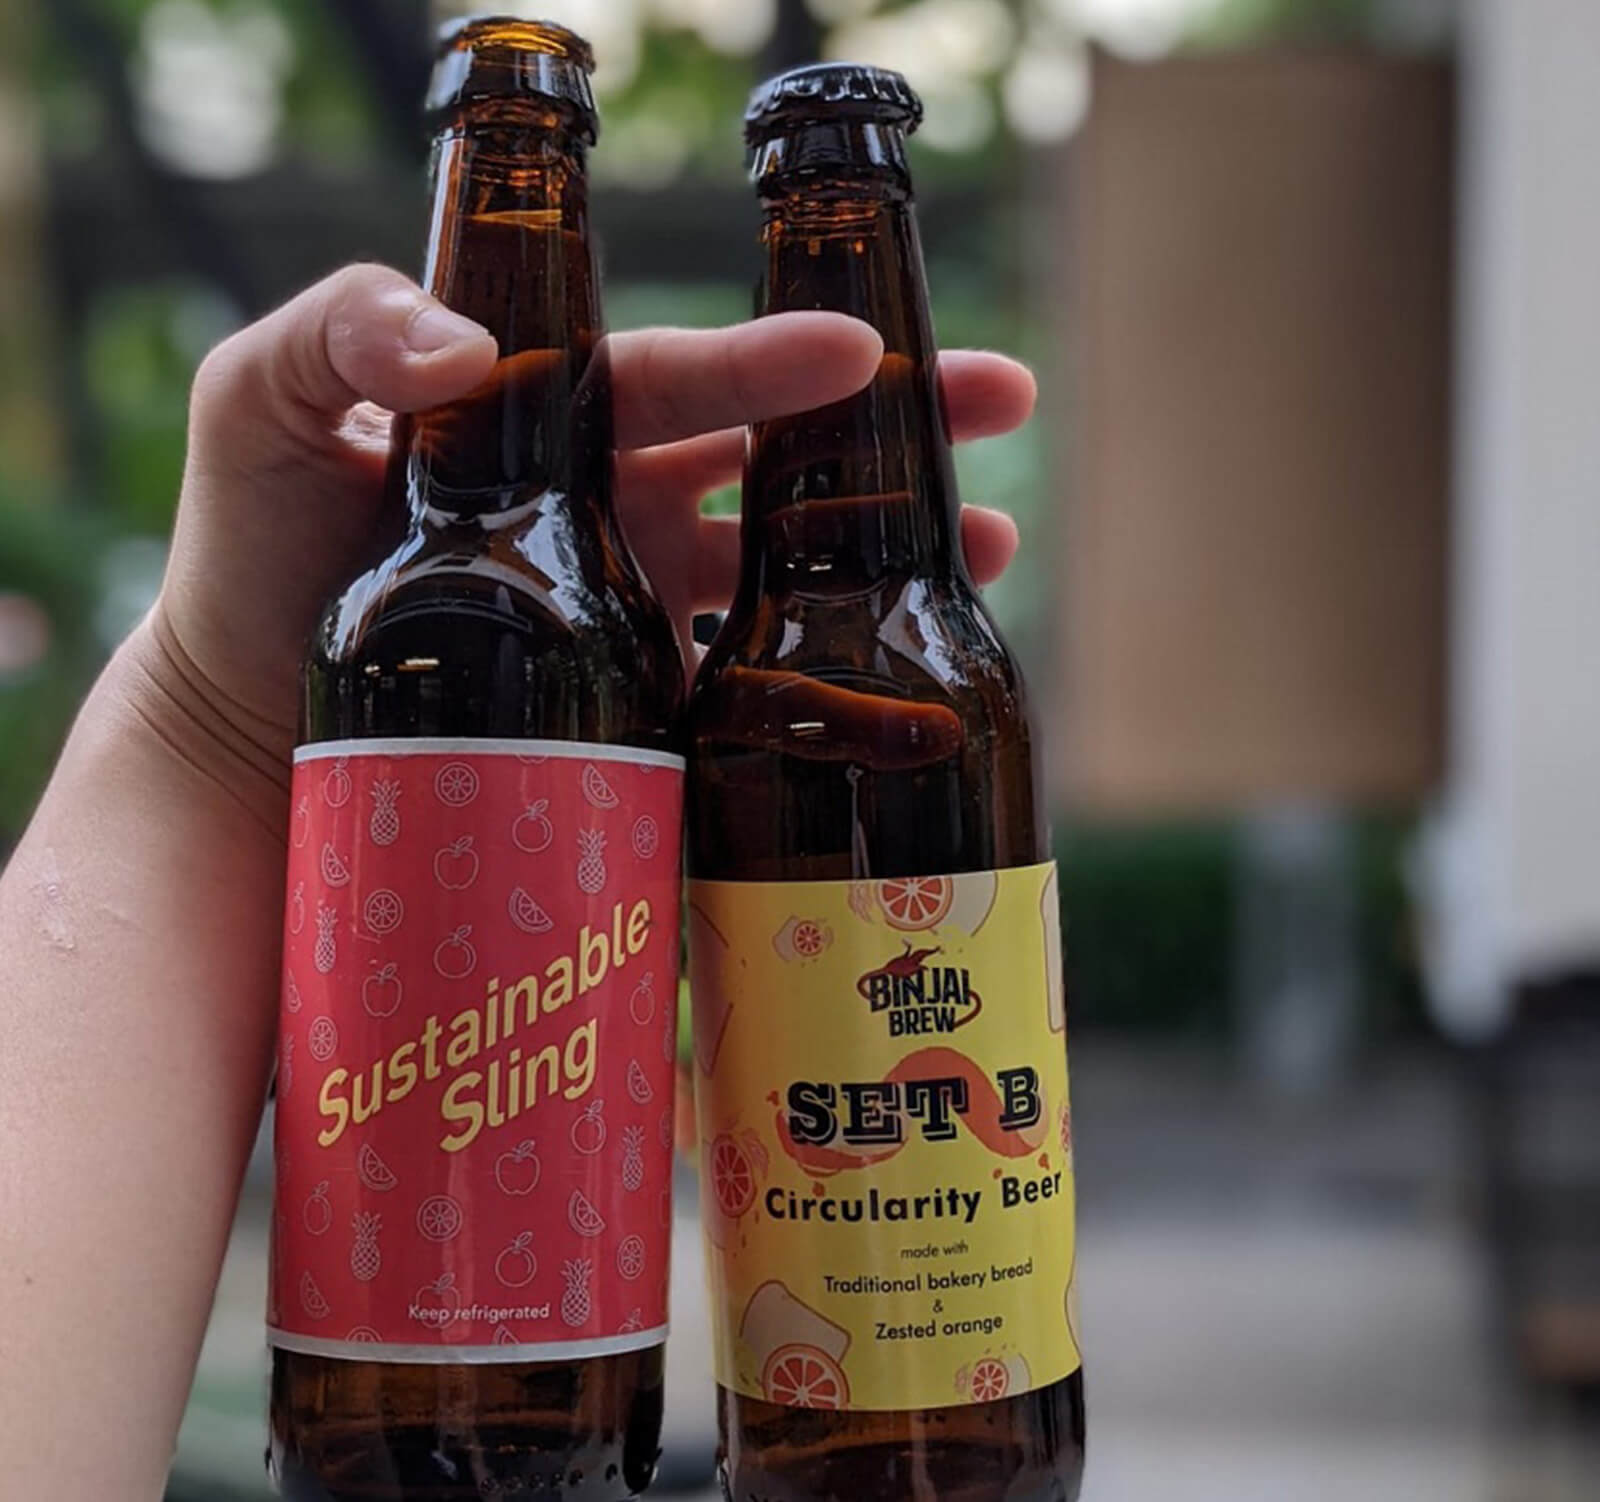 ‘Circularity Beer’ and ‘Sustainable Sling’ made from waste such as fruit peels and off-cuts of bread